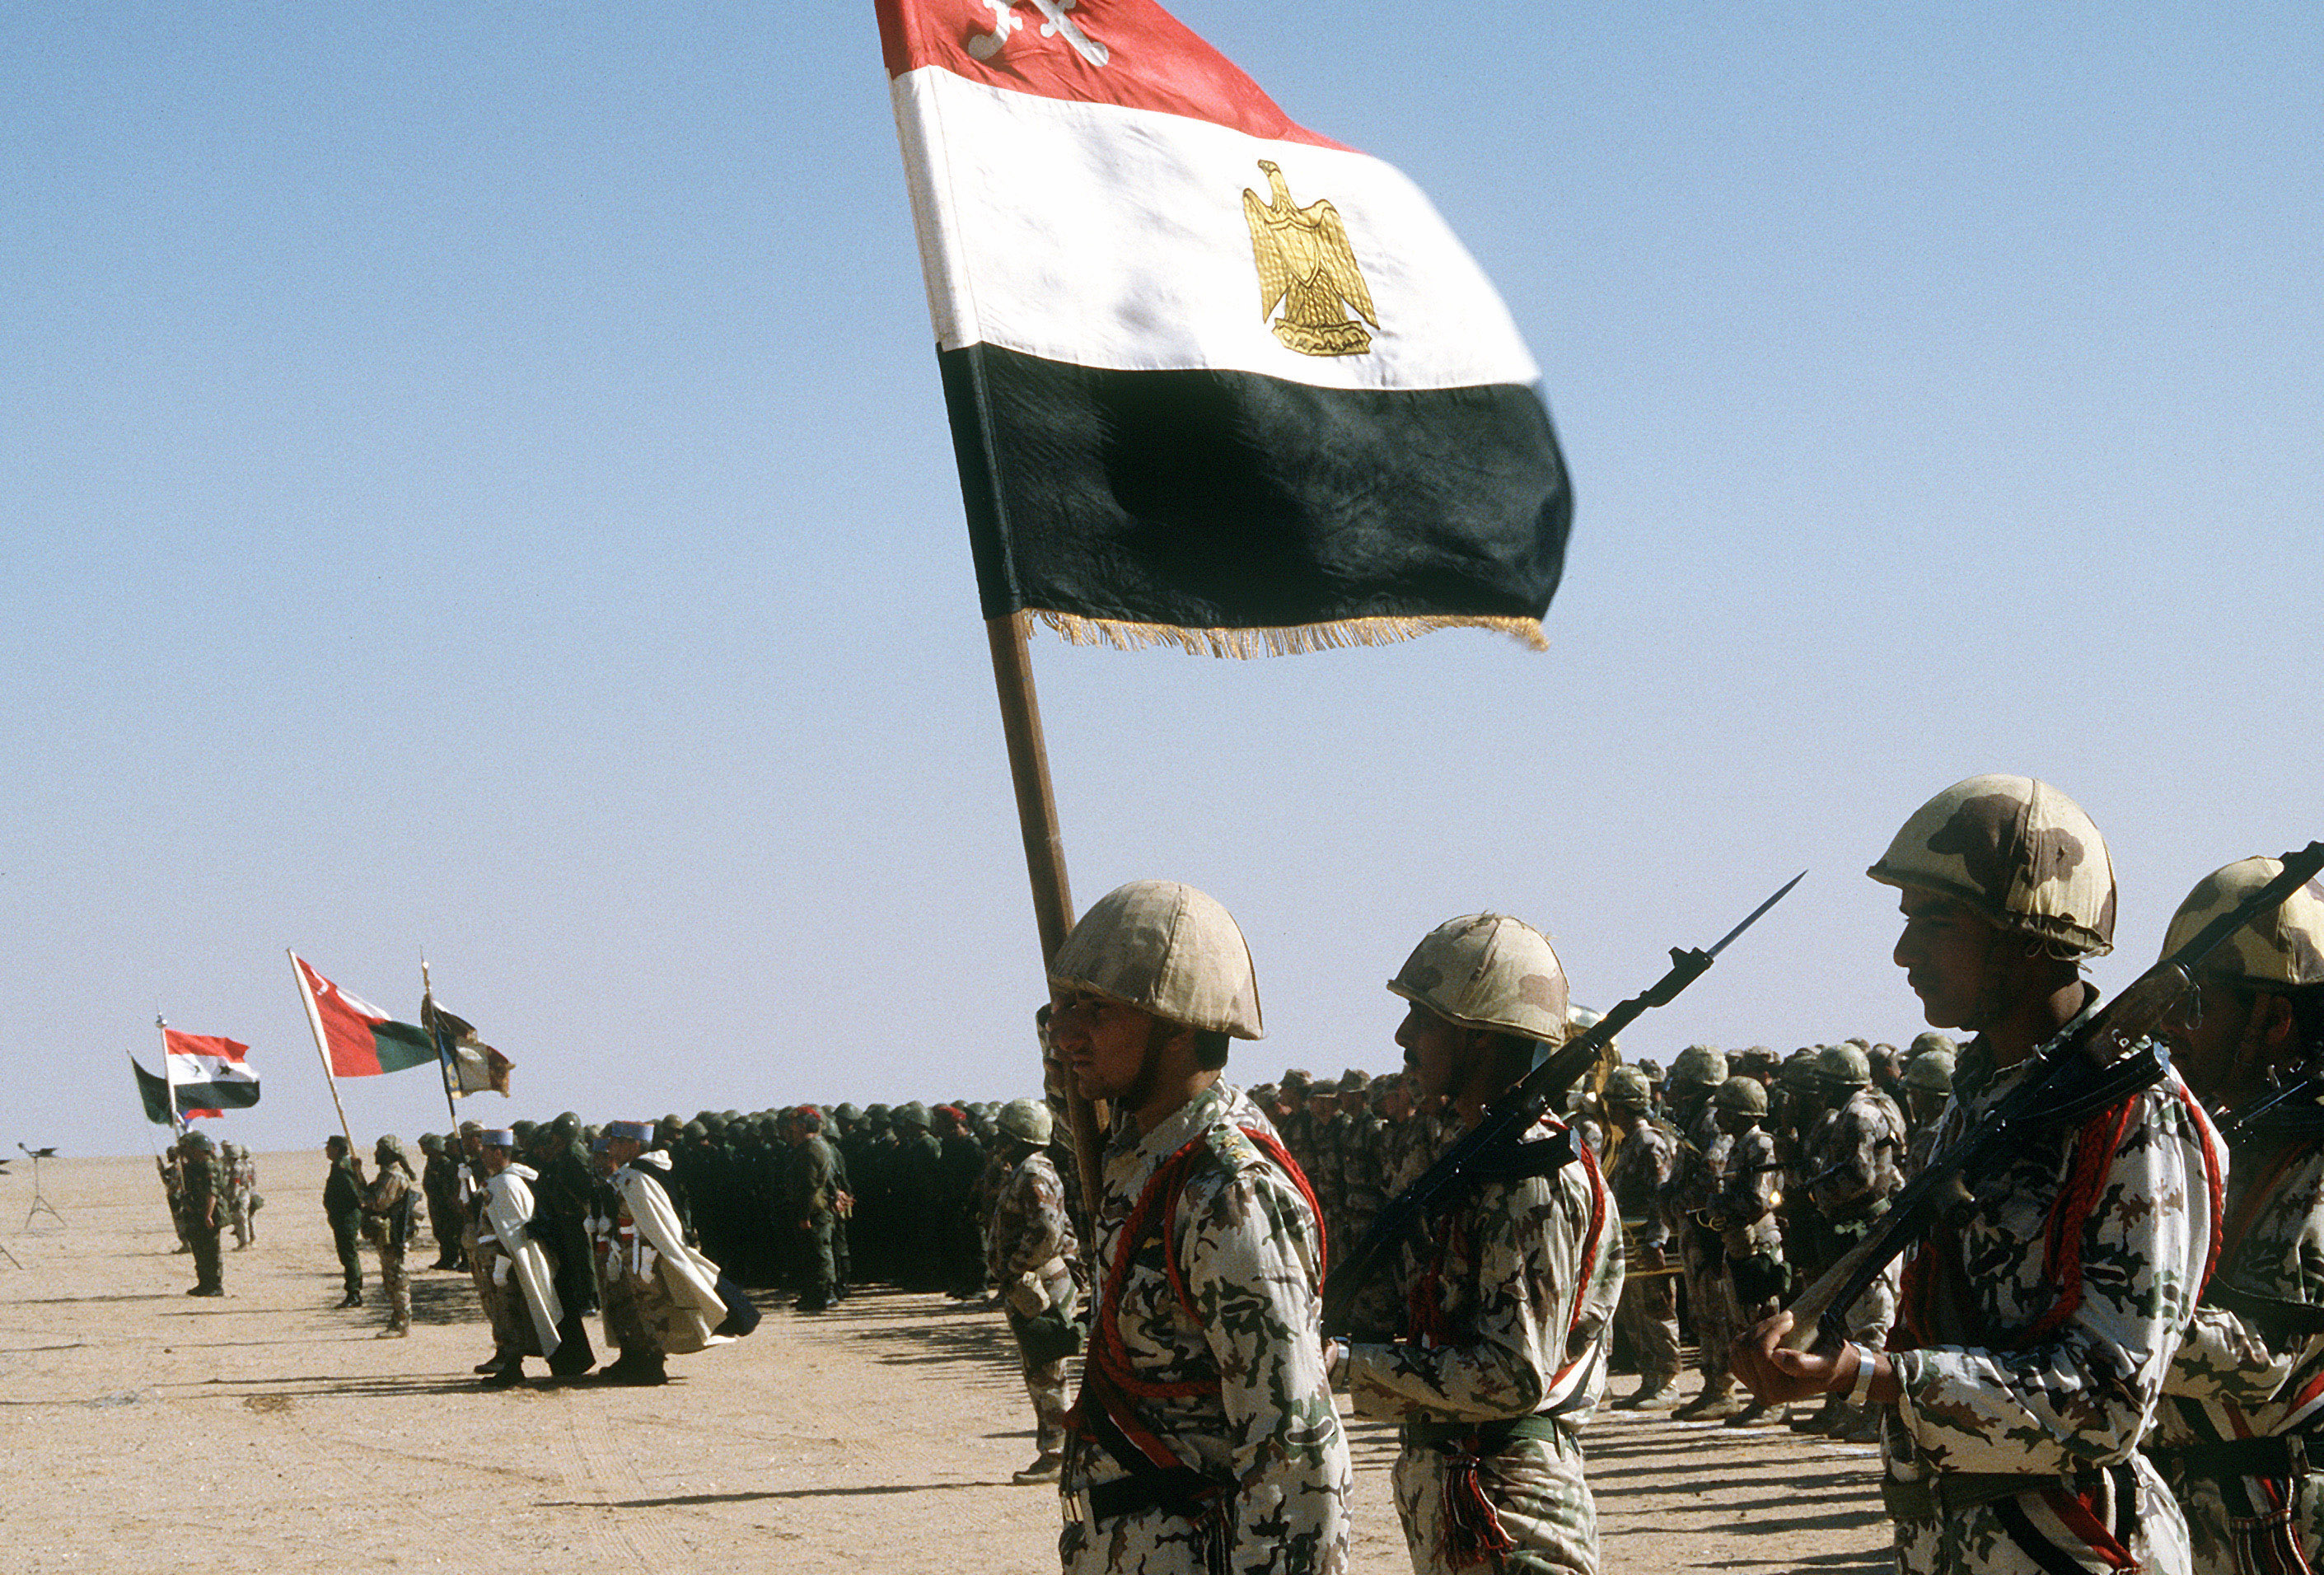 Egyptian military, responsible for numerous rights violations.